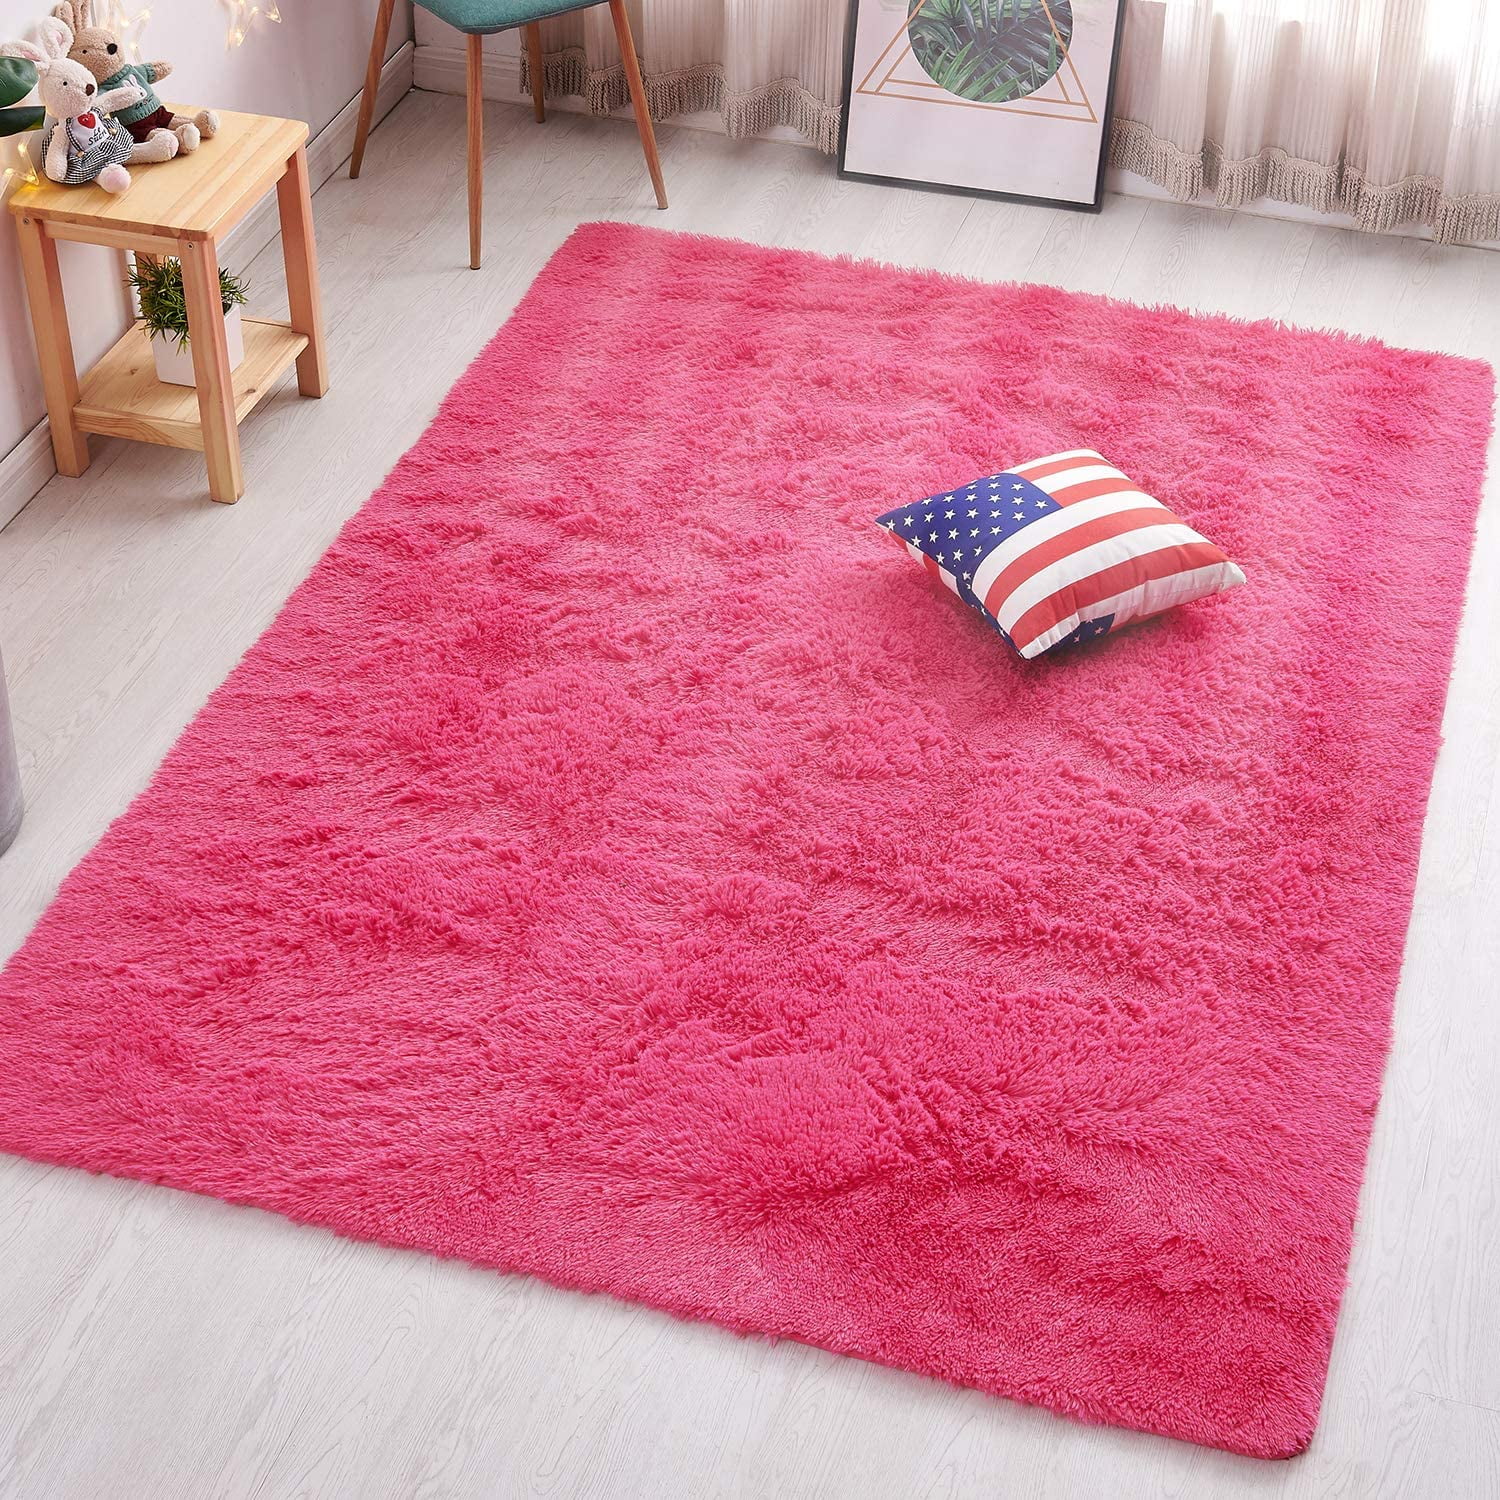 Fashionable and durable Hot Pink Fluffy Shag Area Rugs for Bedroom 5x7 ...